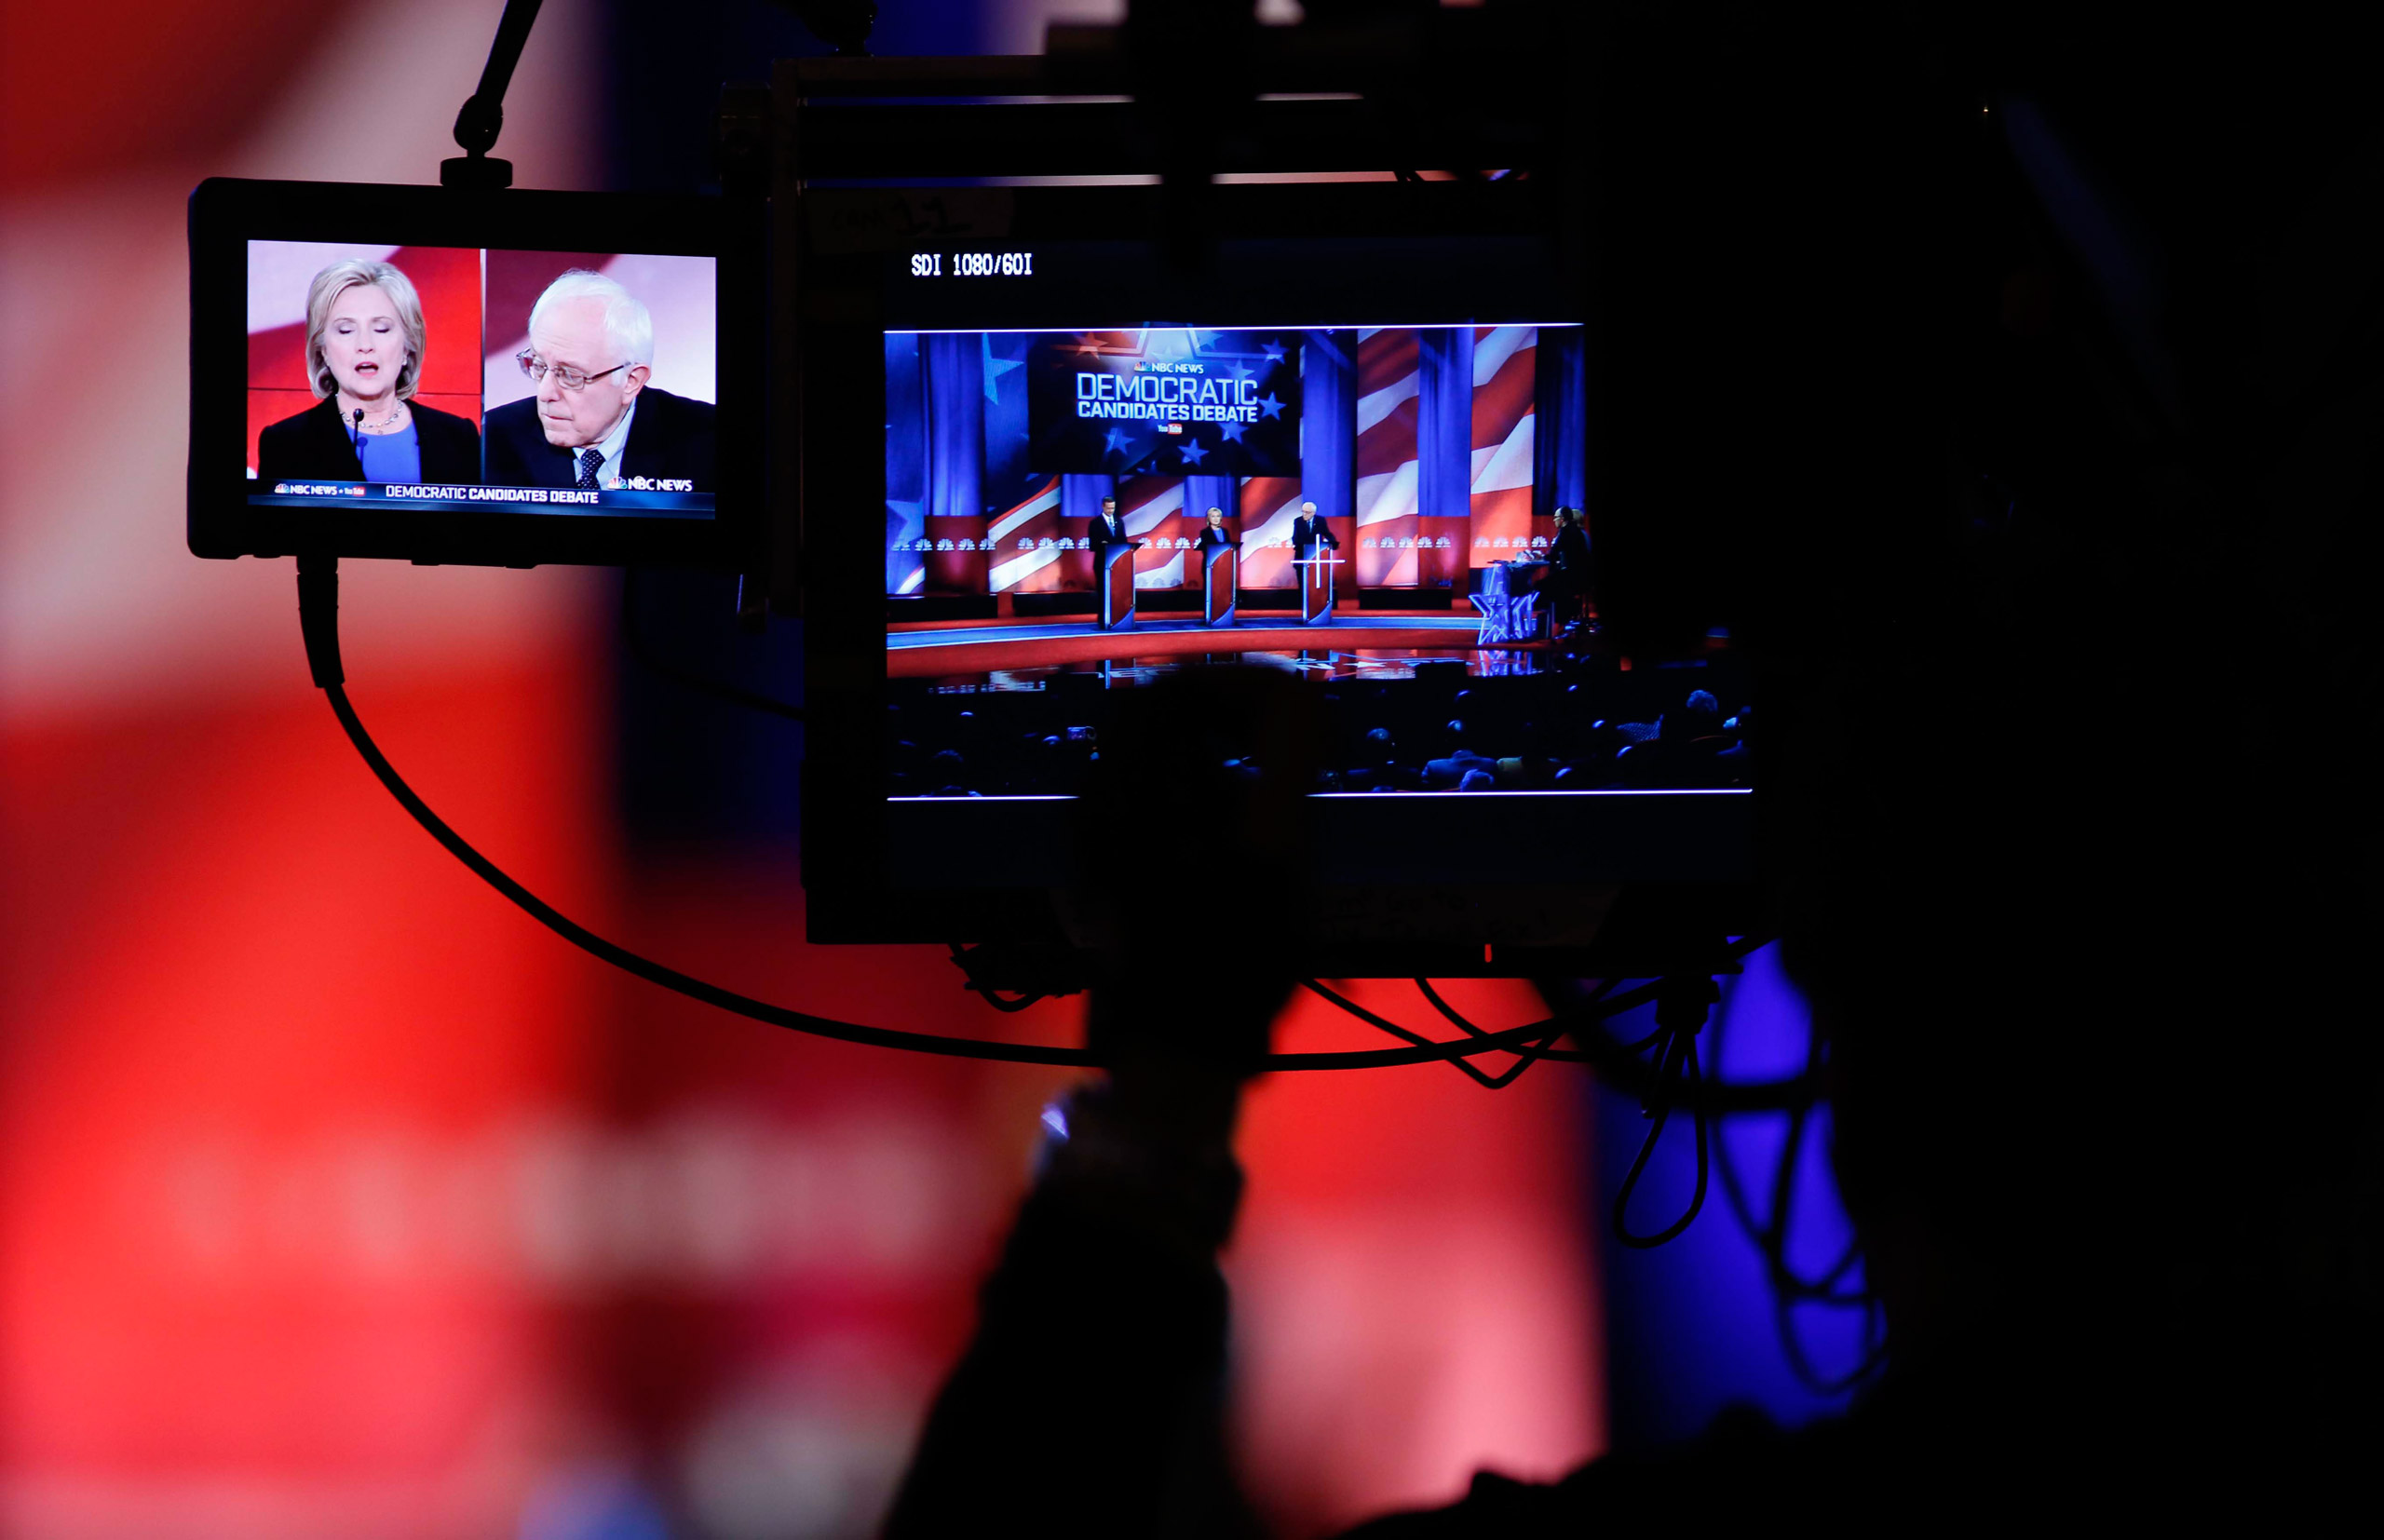 A camera man focuses on Democratic presidential candidates Hillary Clinton and Sen. Bernie Sanders as they participate in the NBC - YouTube Democratic presidential debate at the Gaillard Center in Charleston, S.C. on Jan. 17, 2016. (Mic Smith—AP)